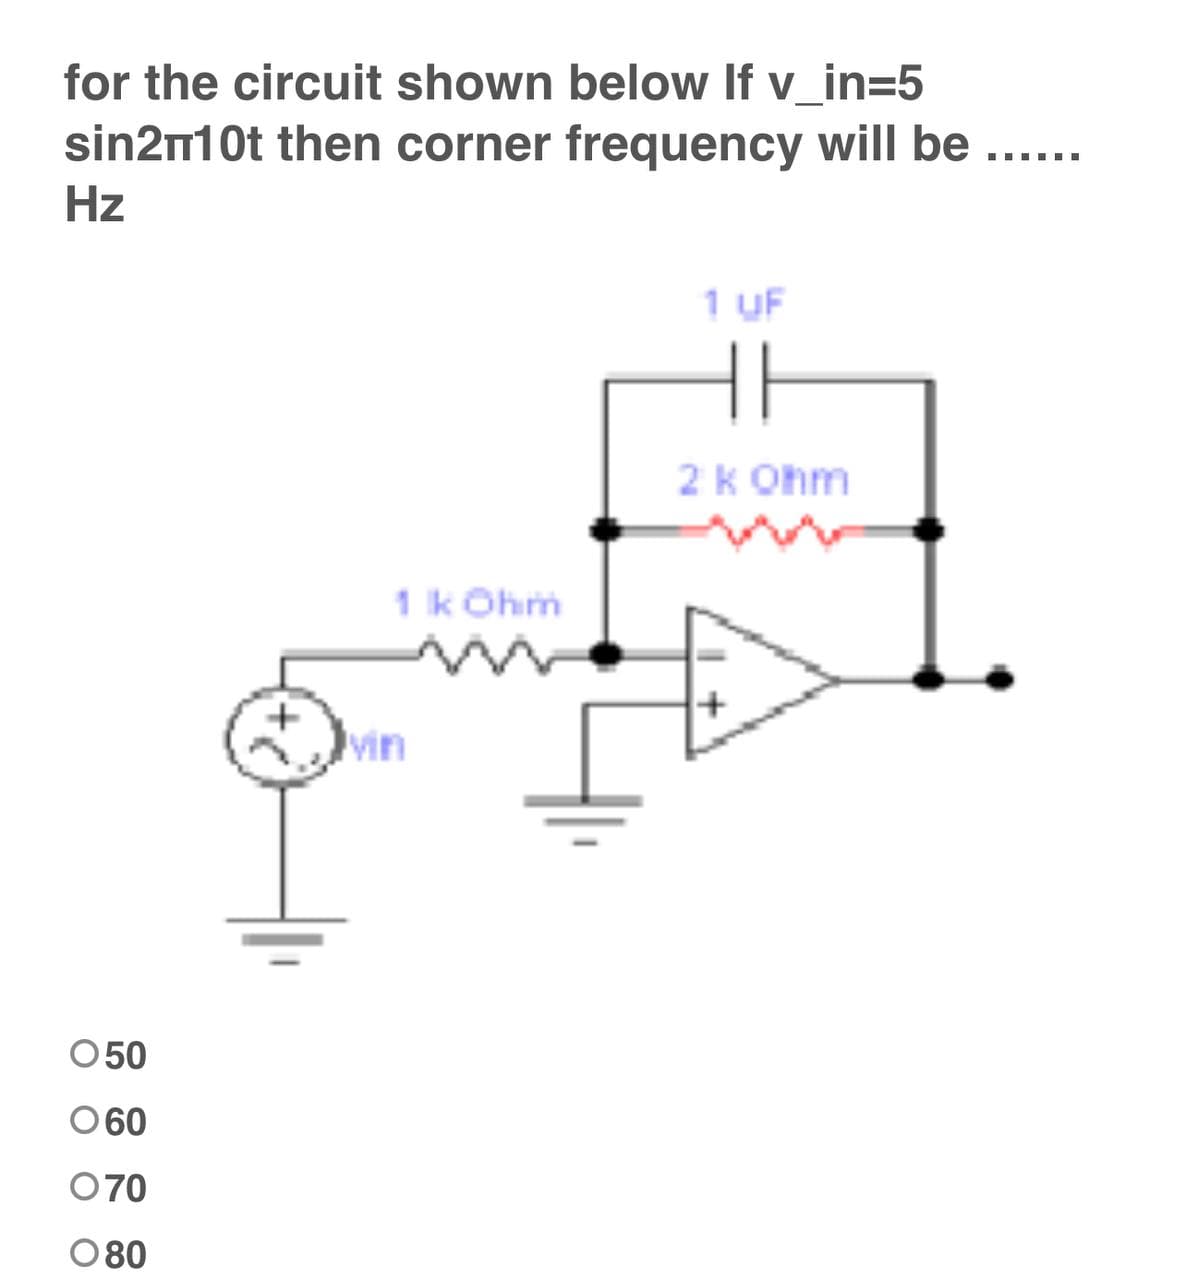 for the circuit shown below If v_in=5
sin2n10t then corner frequency will be
Hz
1 UF
2 k Ohm
1 k Ohim
050
060
070
080
Min